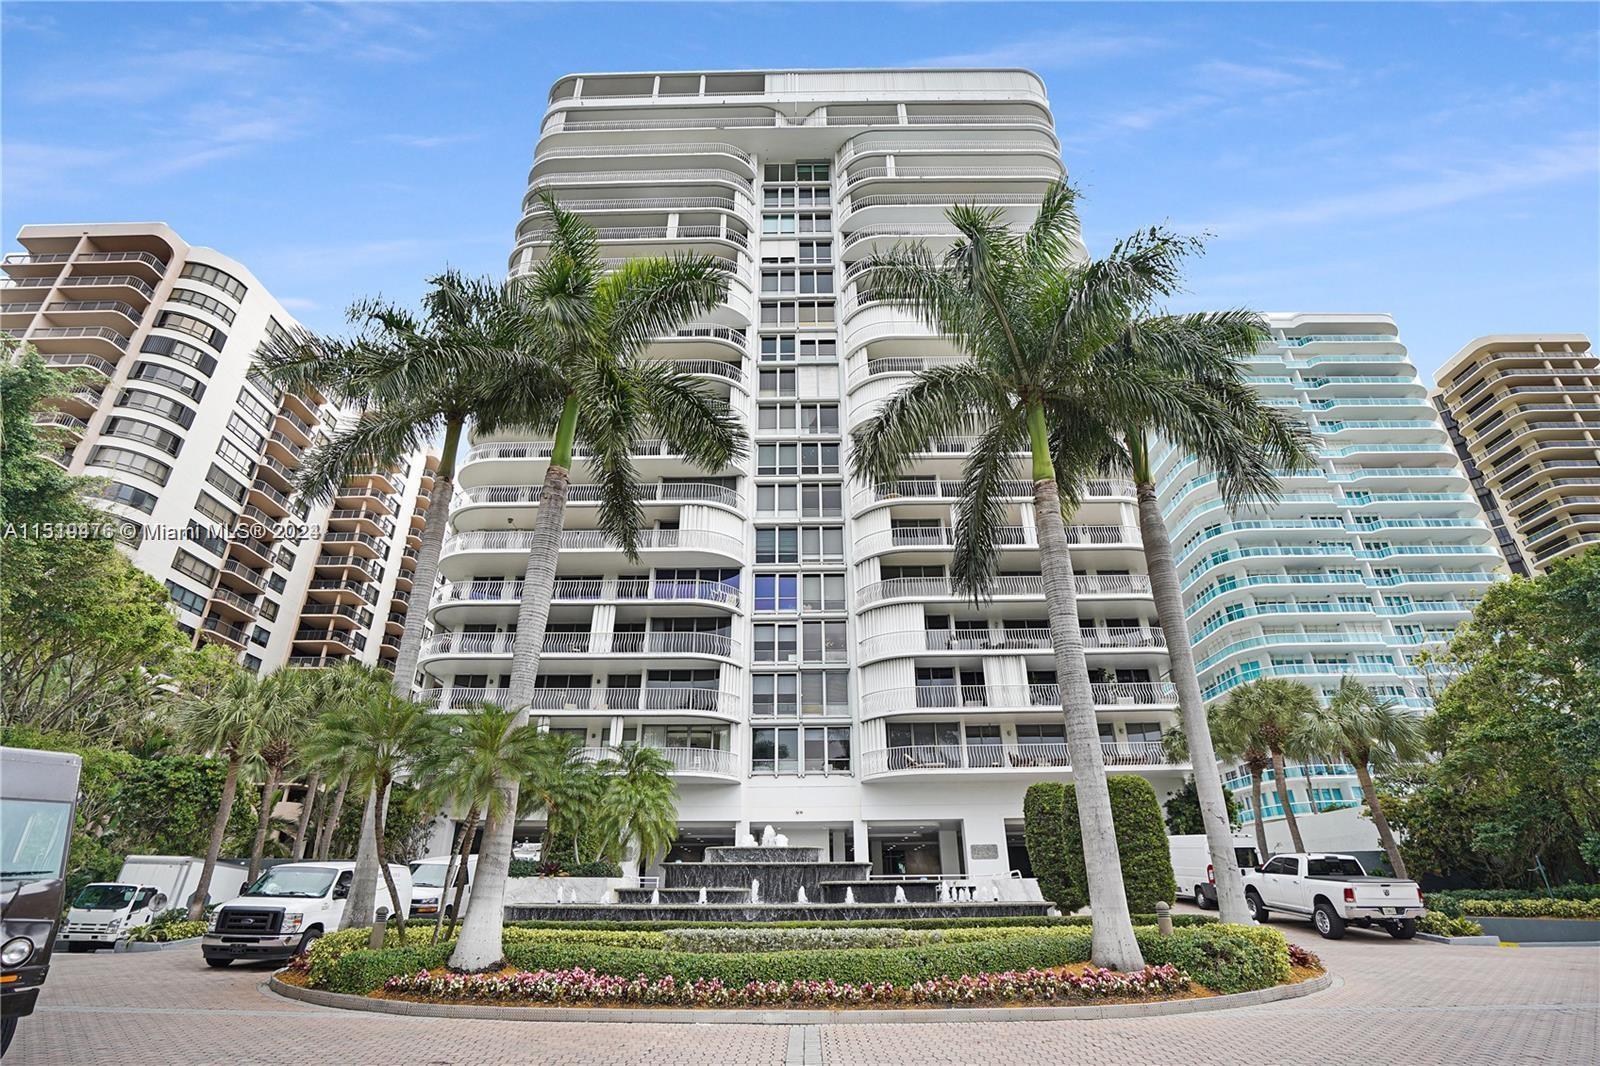 Photo of 10155 Collins Ave #406 in Bal Harbour, FL